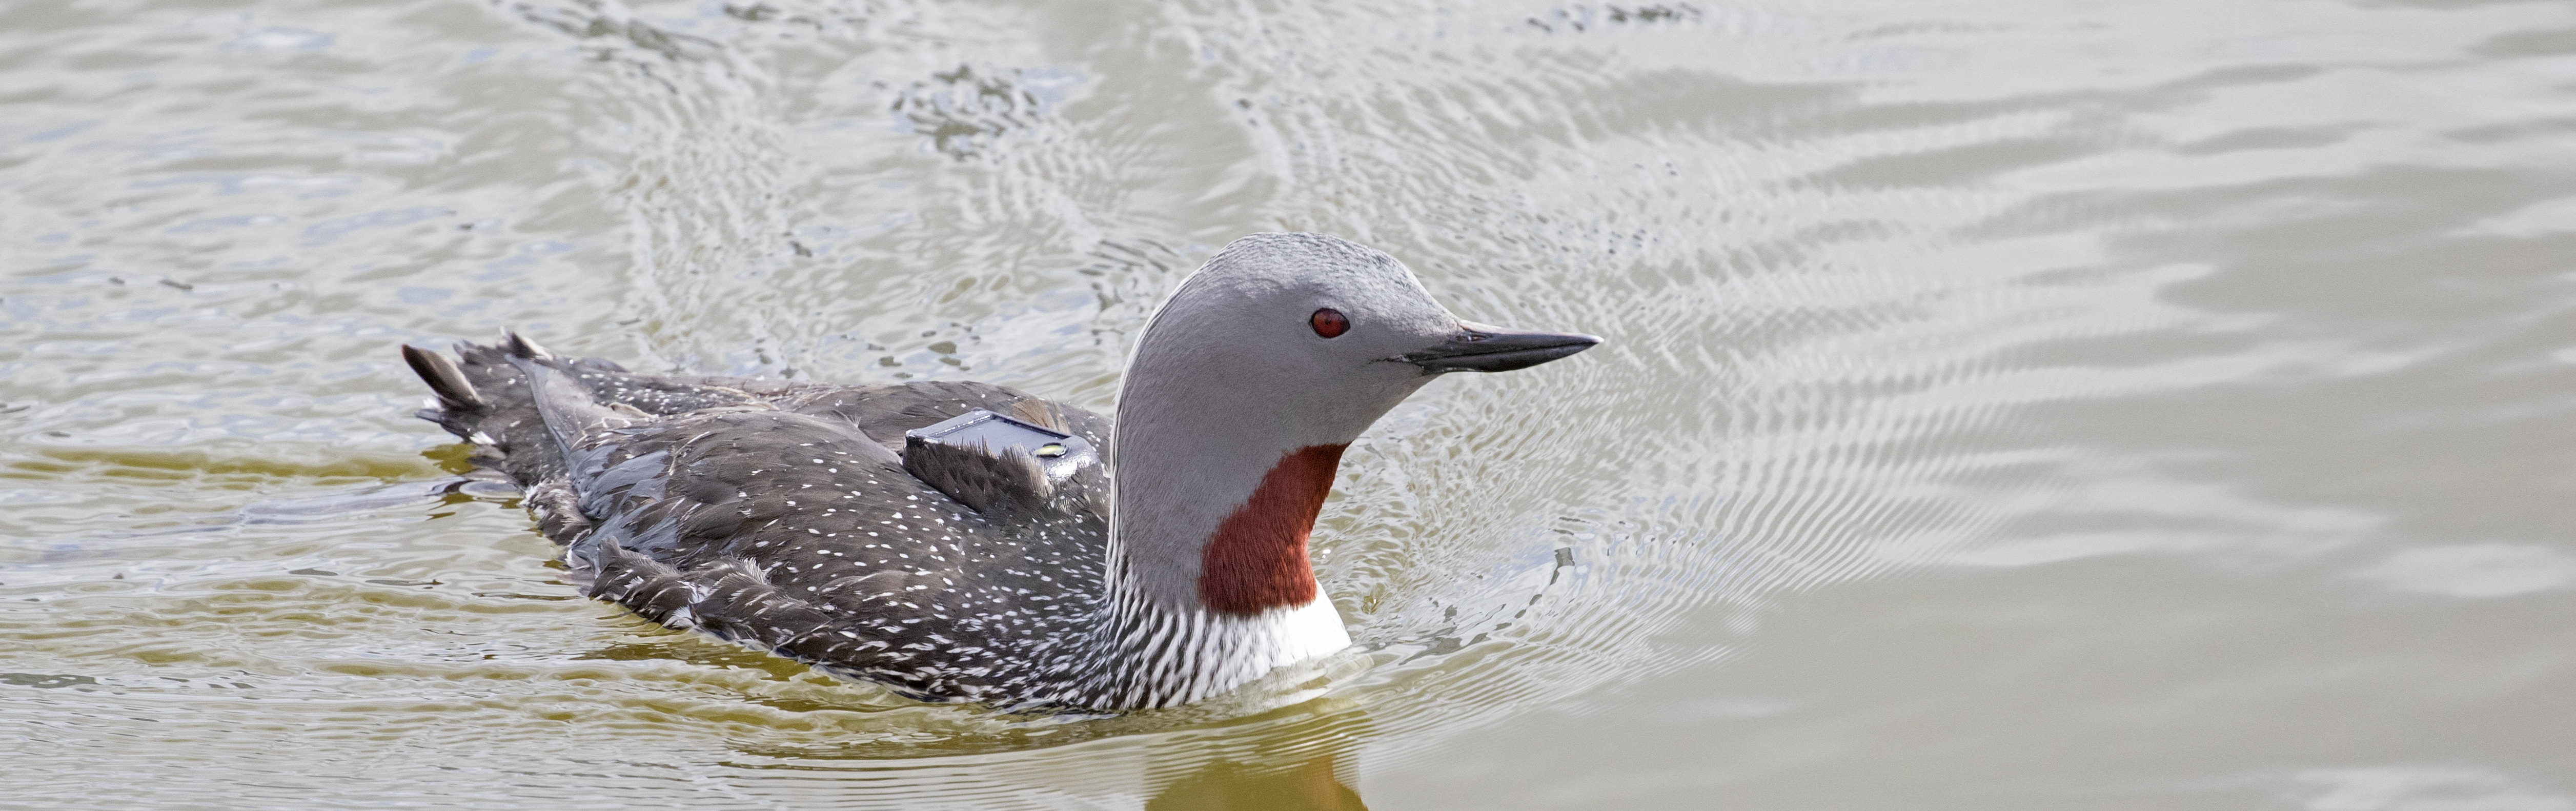 An adult red-throated diver with a GPS transmitter glued to its dorsal plumage.